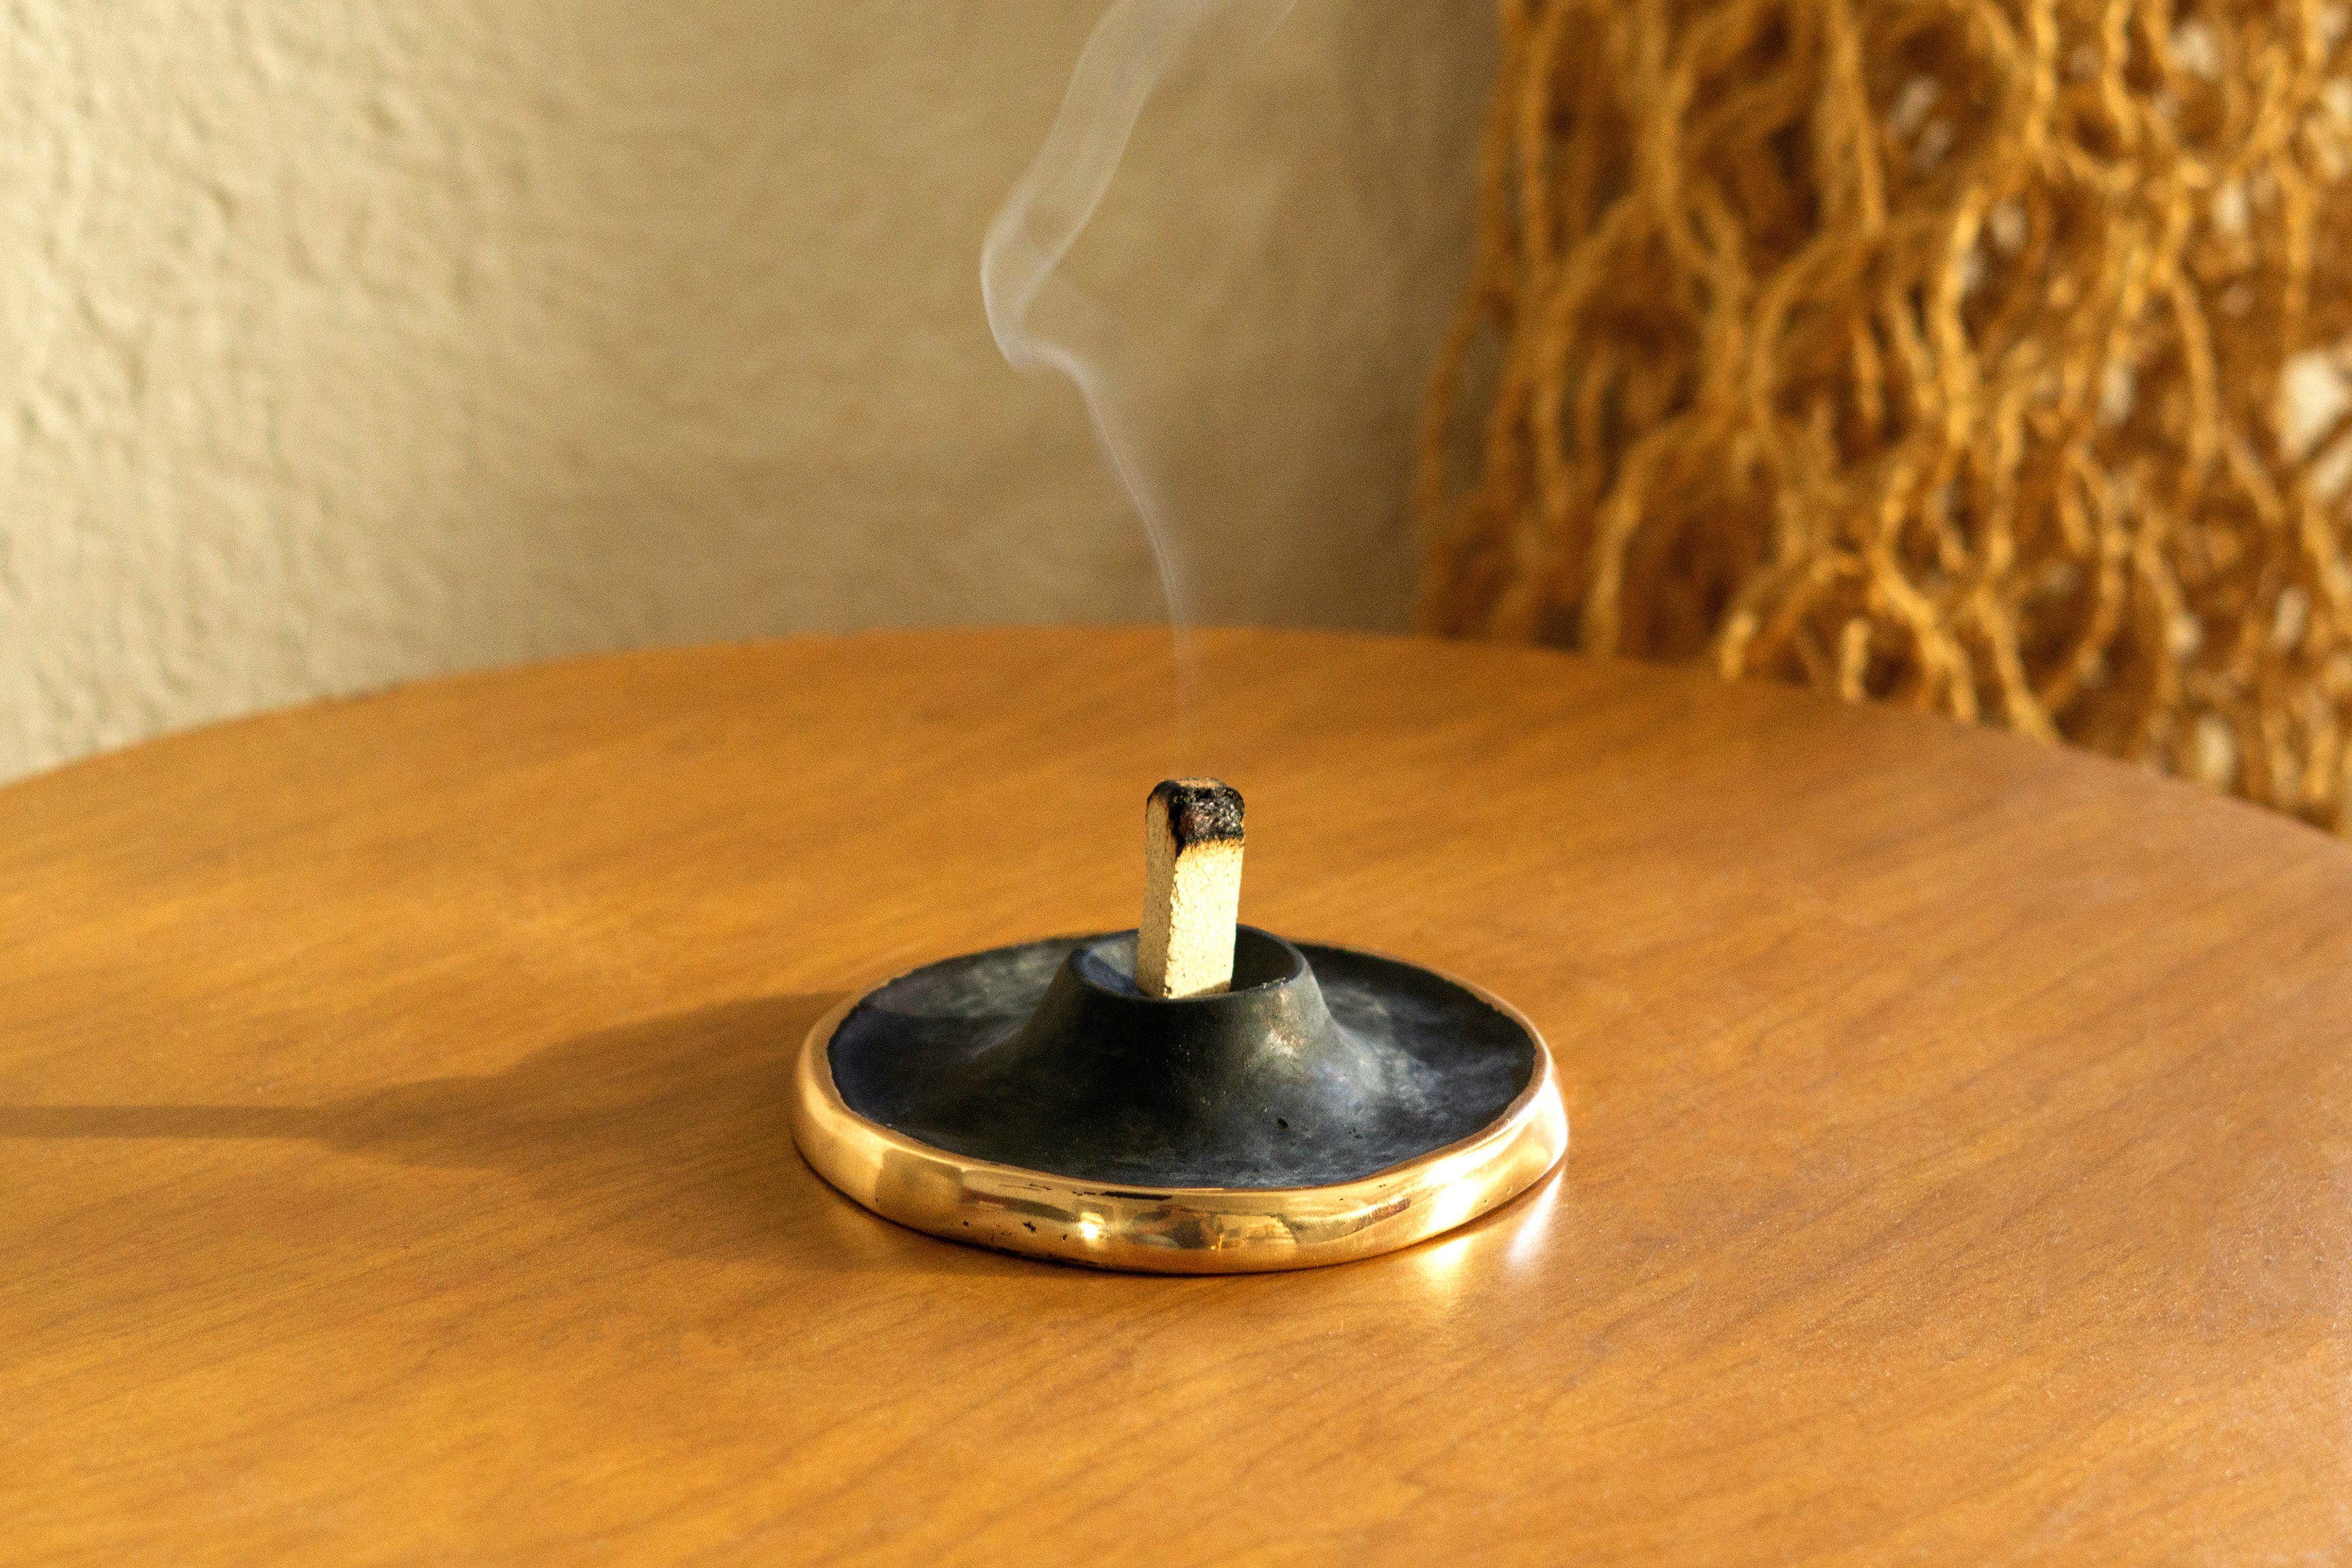 Incense hold